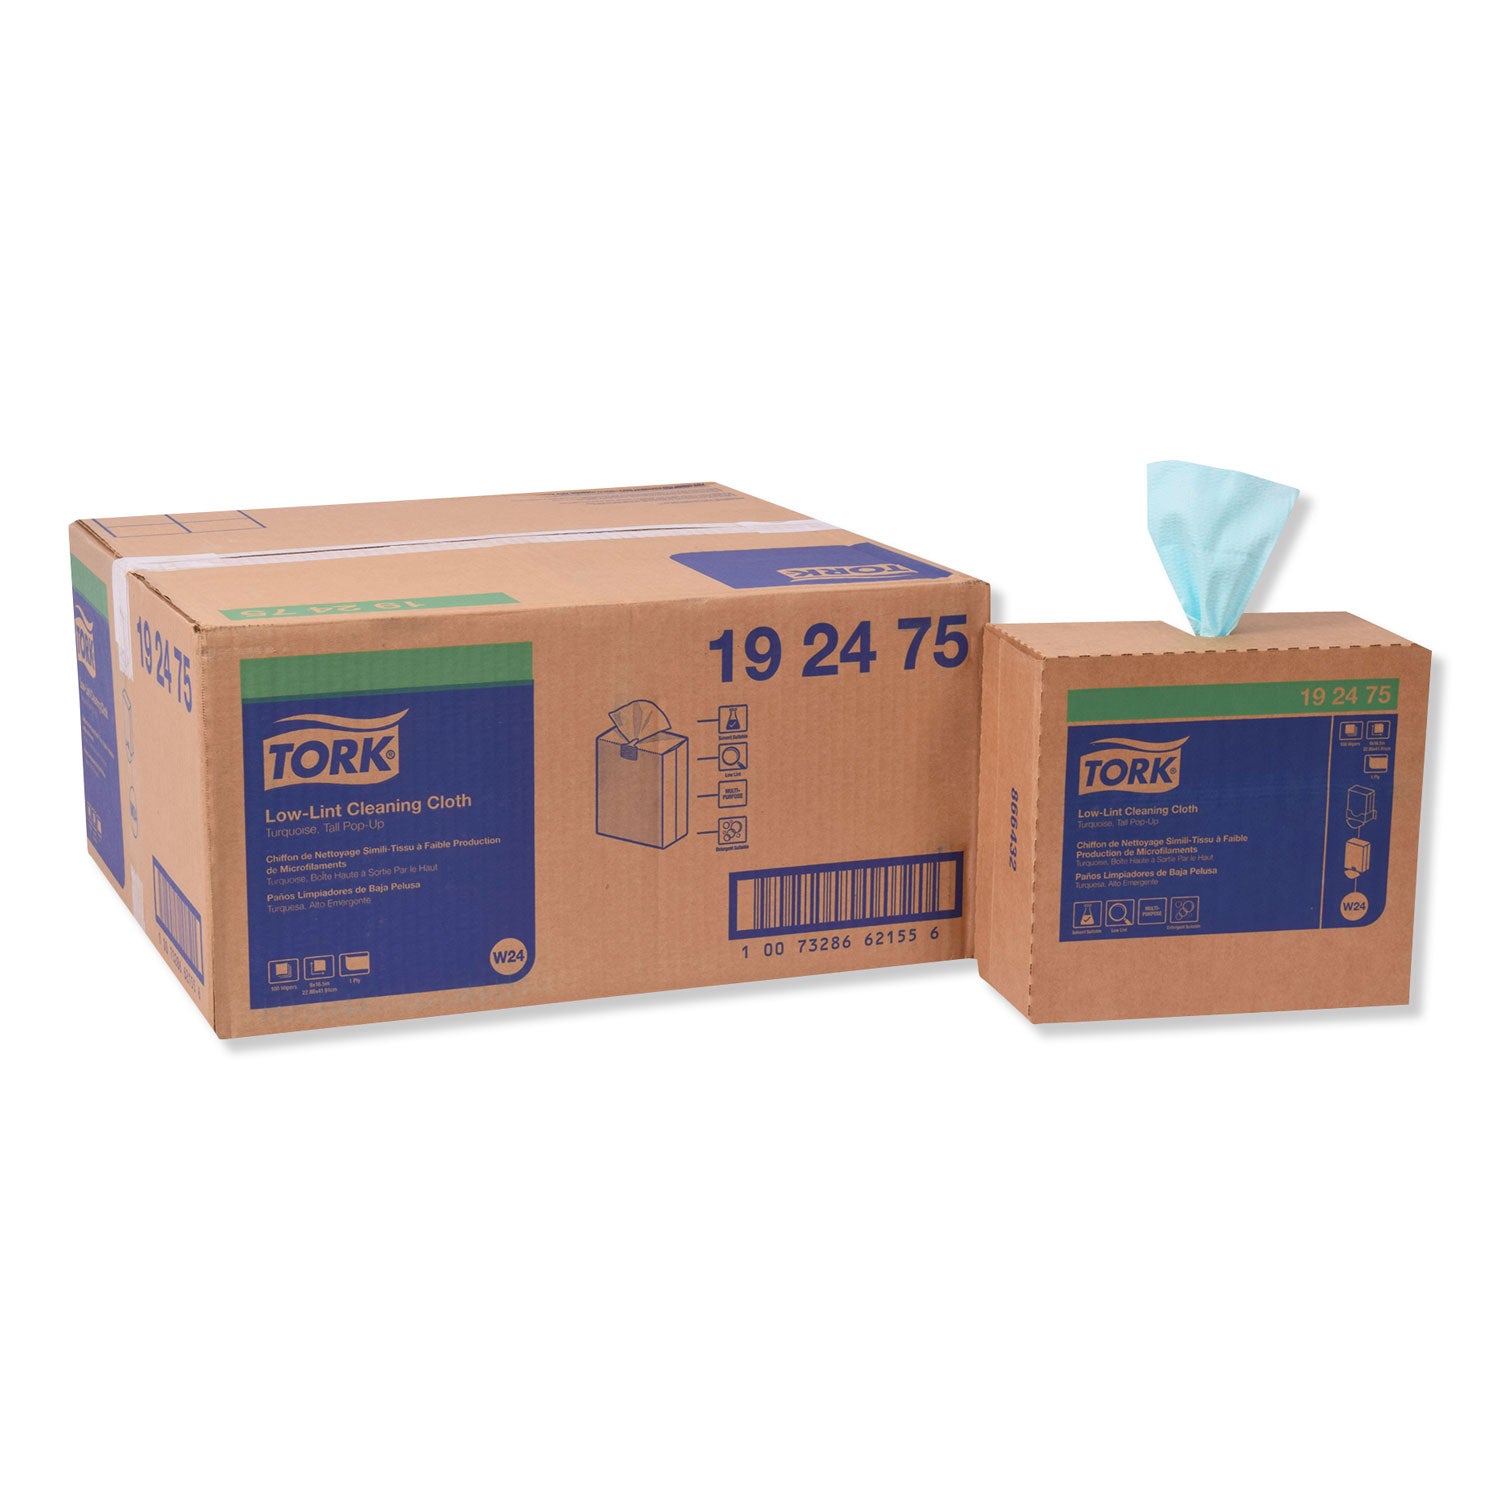 low-lint-cleaning-cloth-1-ply-9-x-165-unscented-turquoise-100-box-8-boxes-carton_trk192475 - 1